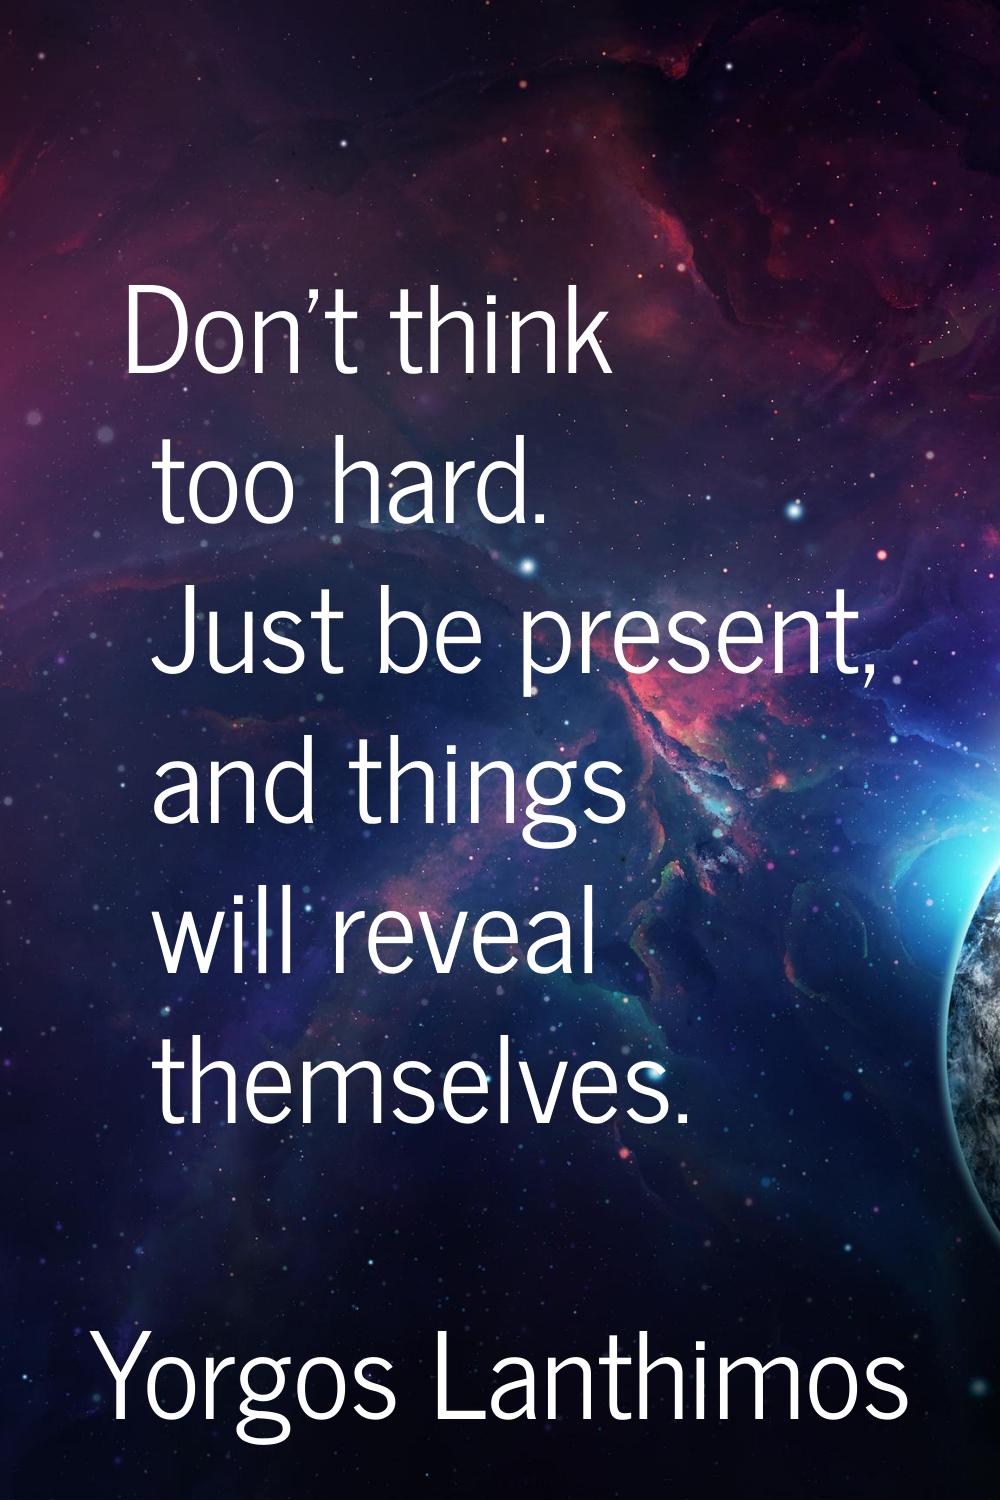 Don't think too hard. Just be present, and things will reveal themselves.